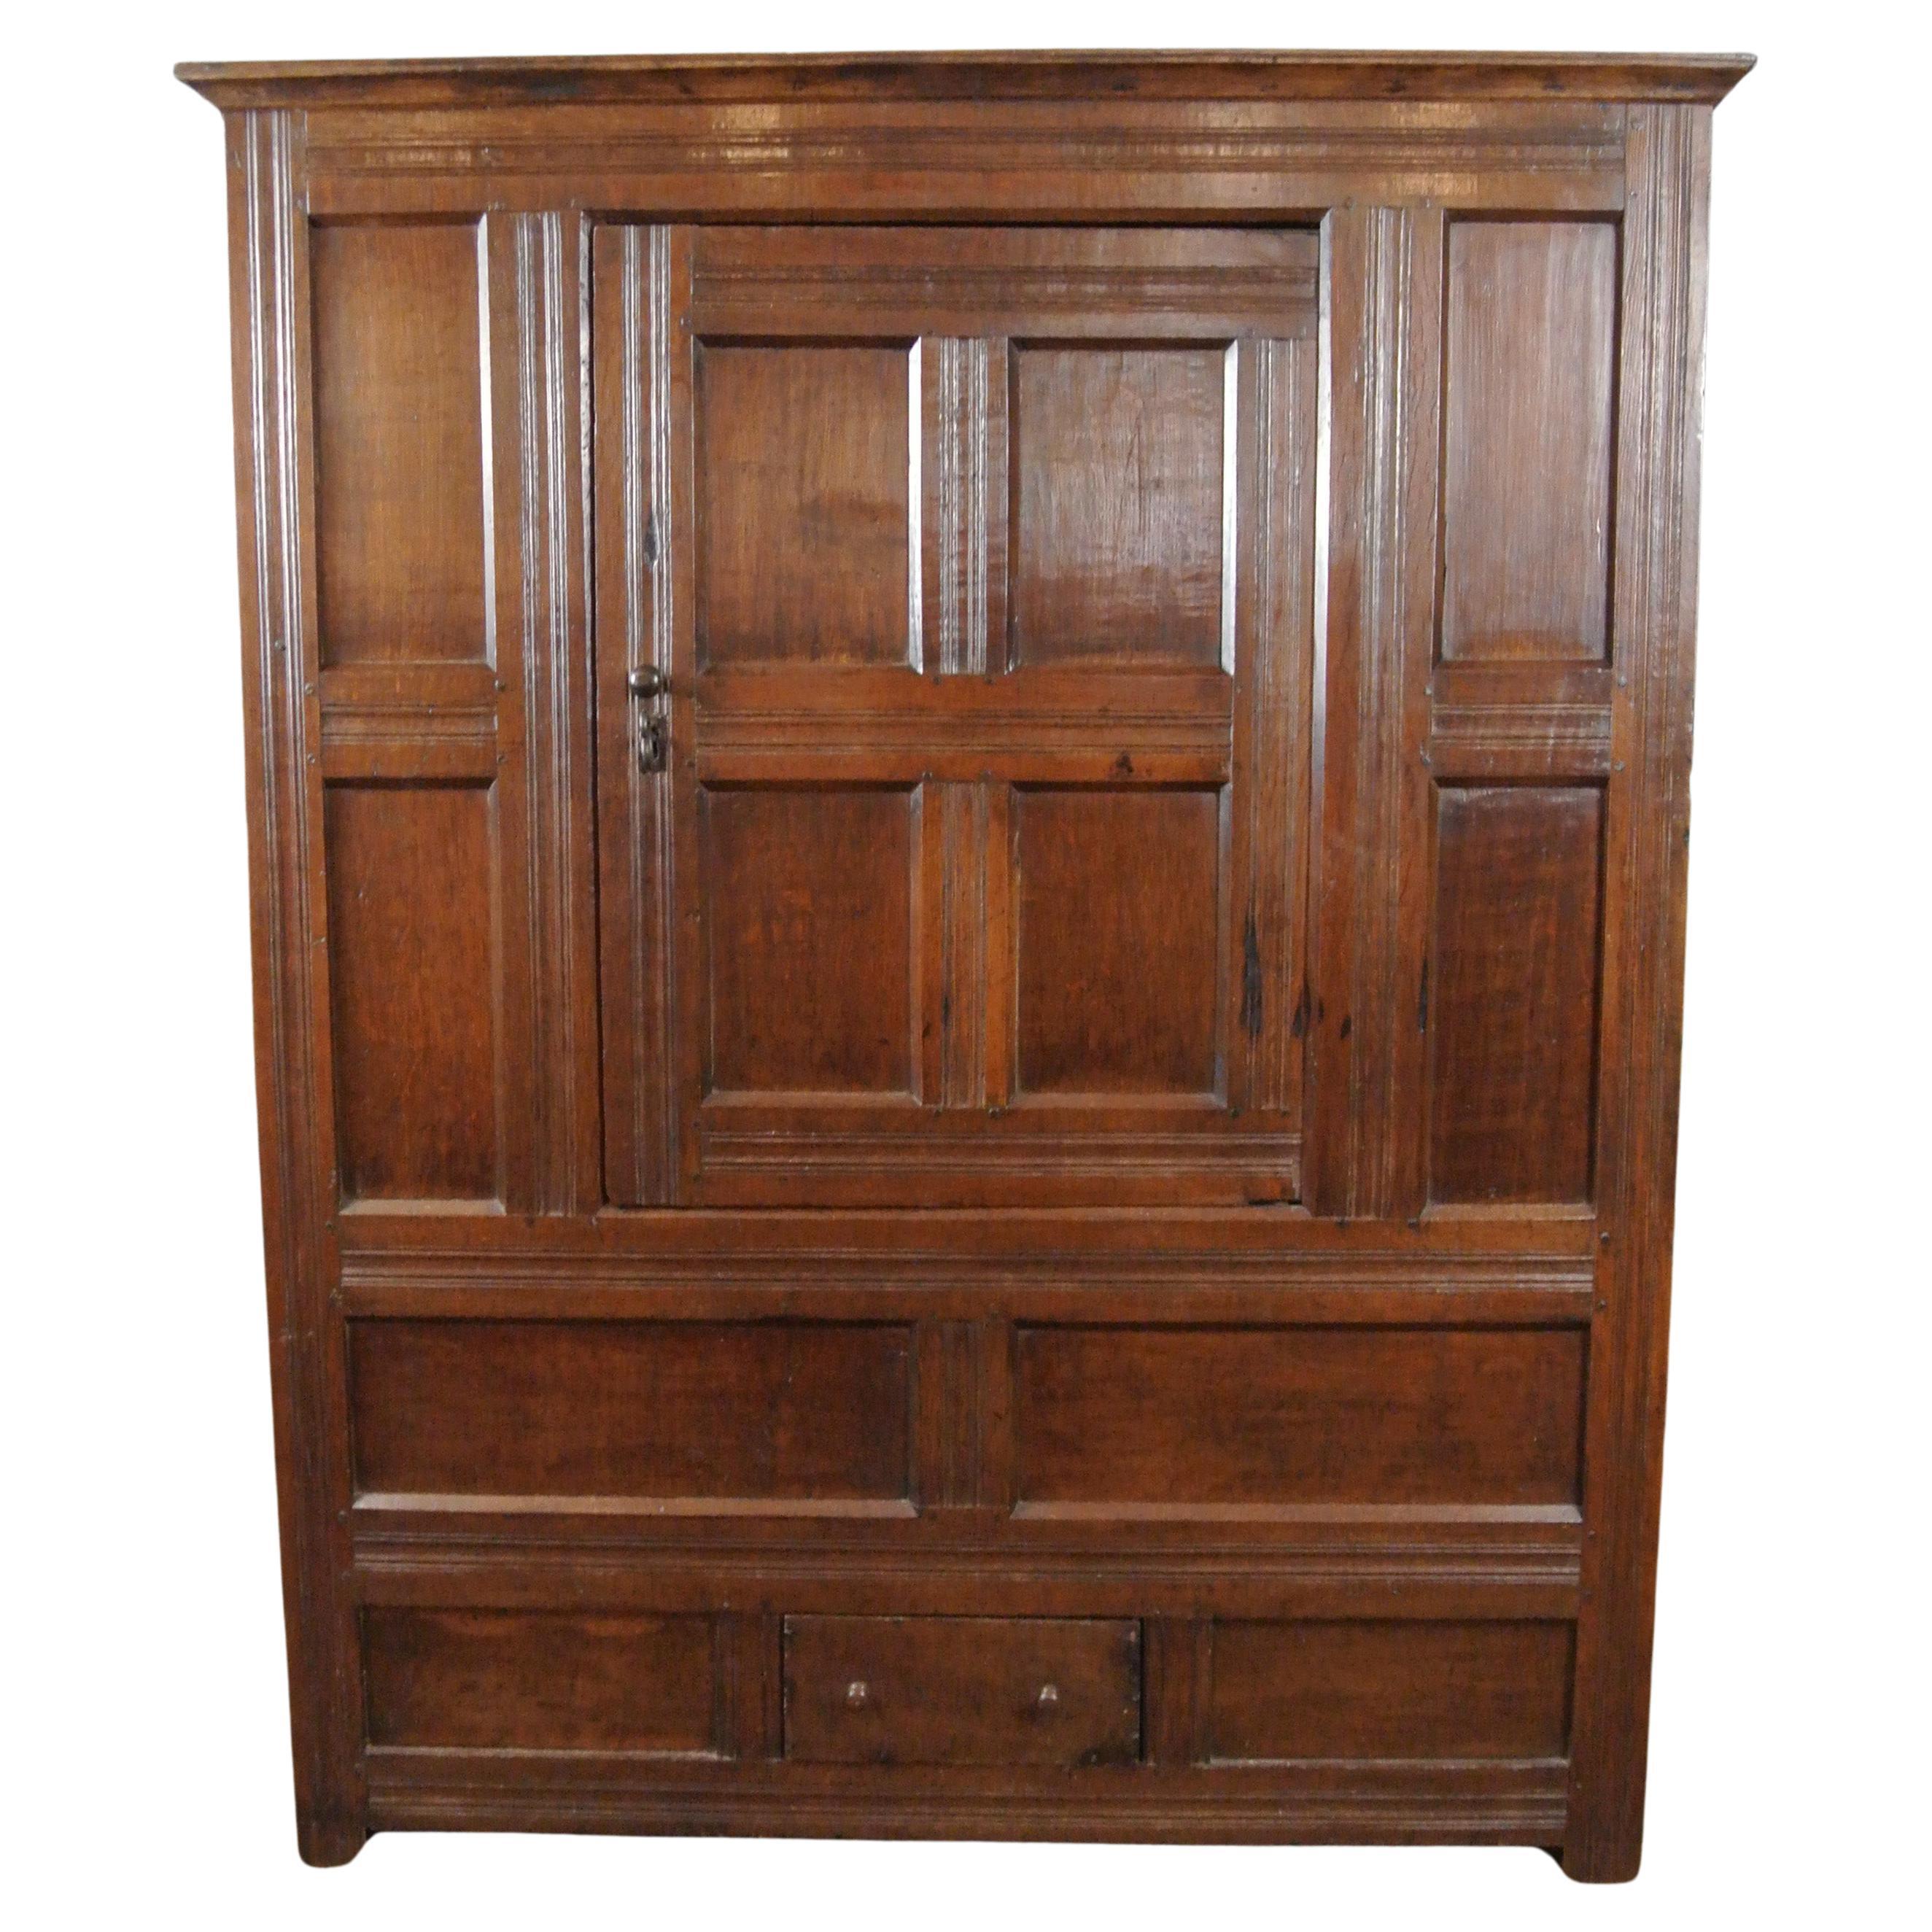 Small And Charming 17th Century Original Press Cupboard C. 1670 For Sale